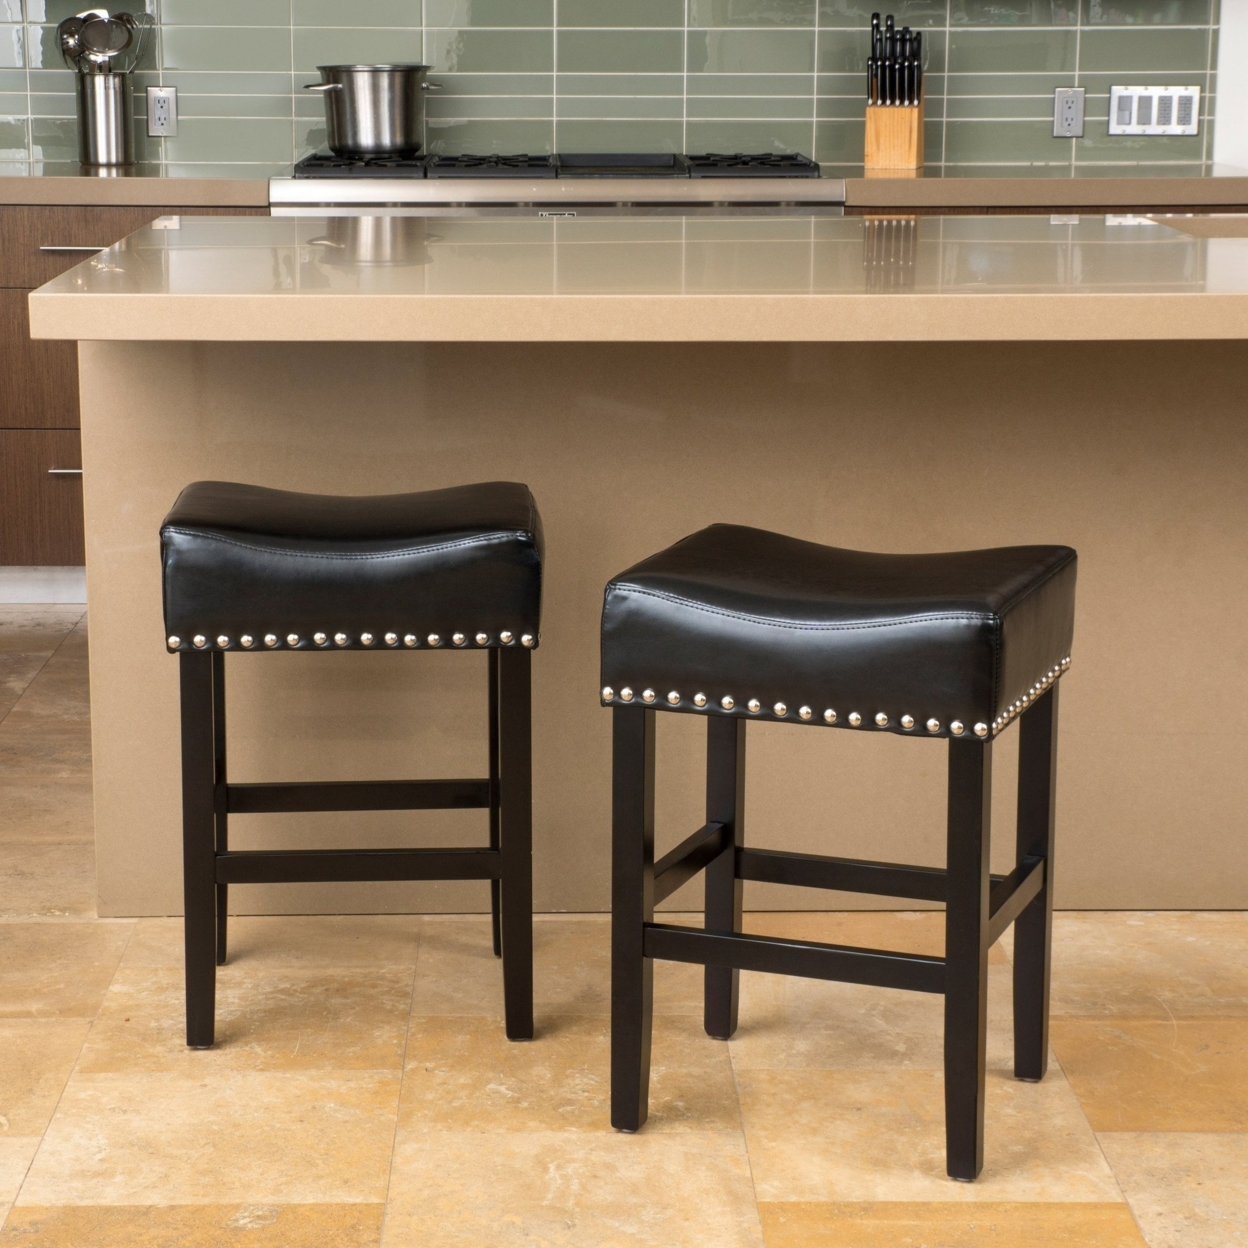 Loring Black Bonded Leather Backless 26-Inch Counter Stool (Set Of 2)